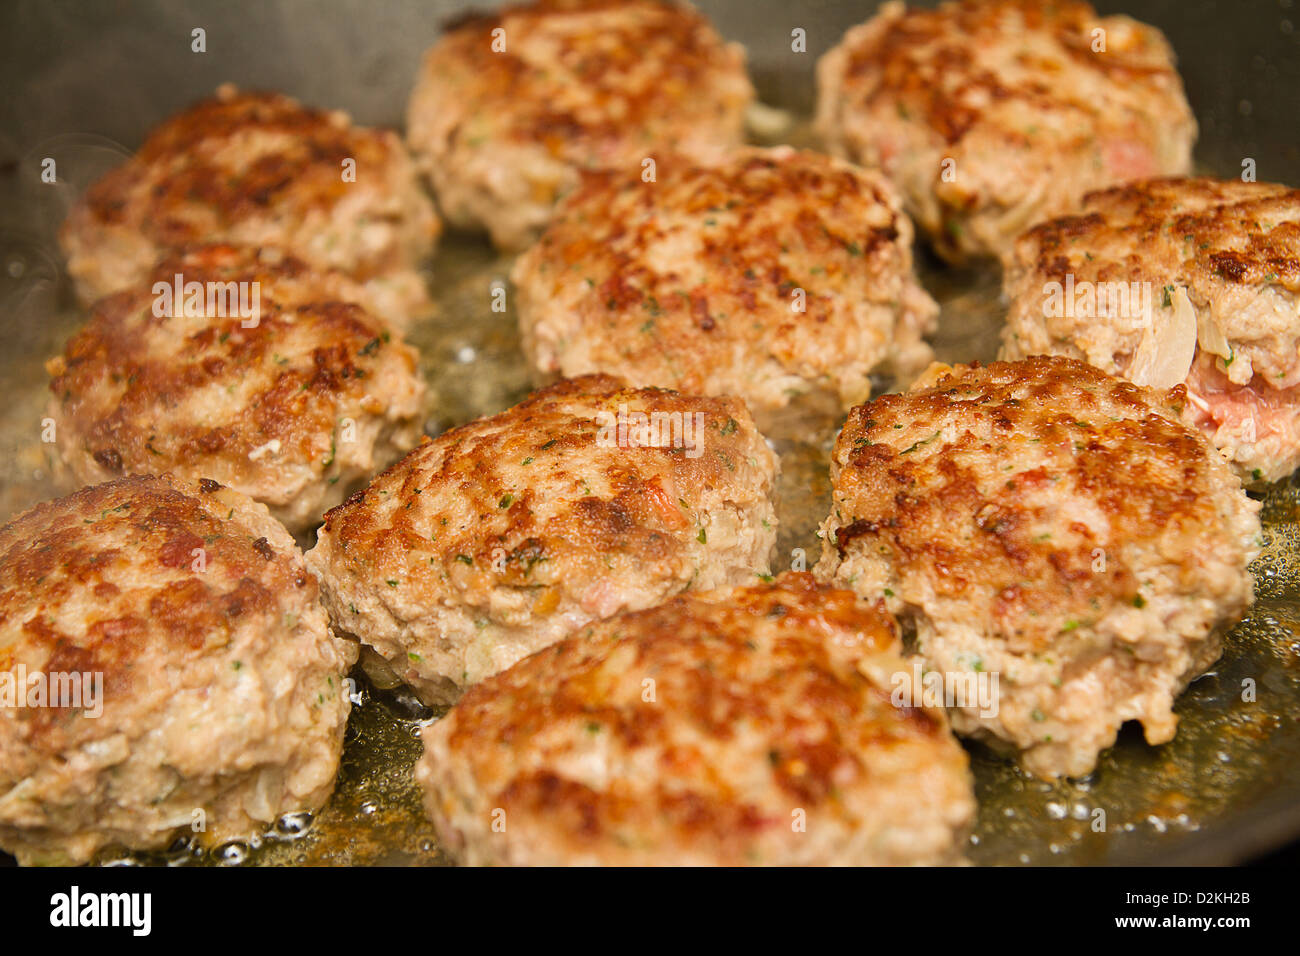 Meatballs in a pan Stock Photo